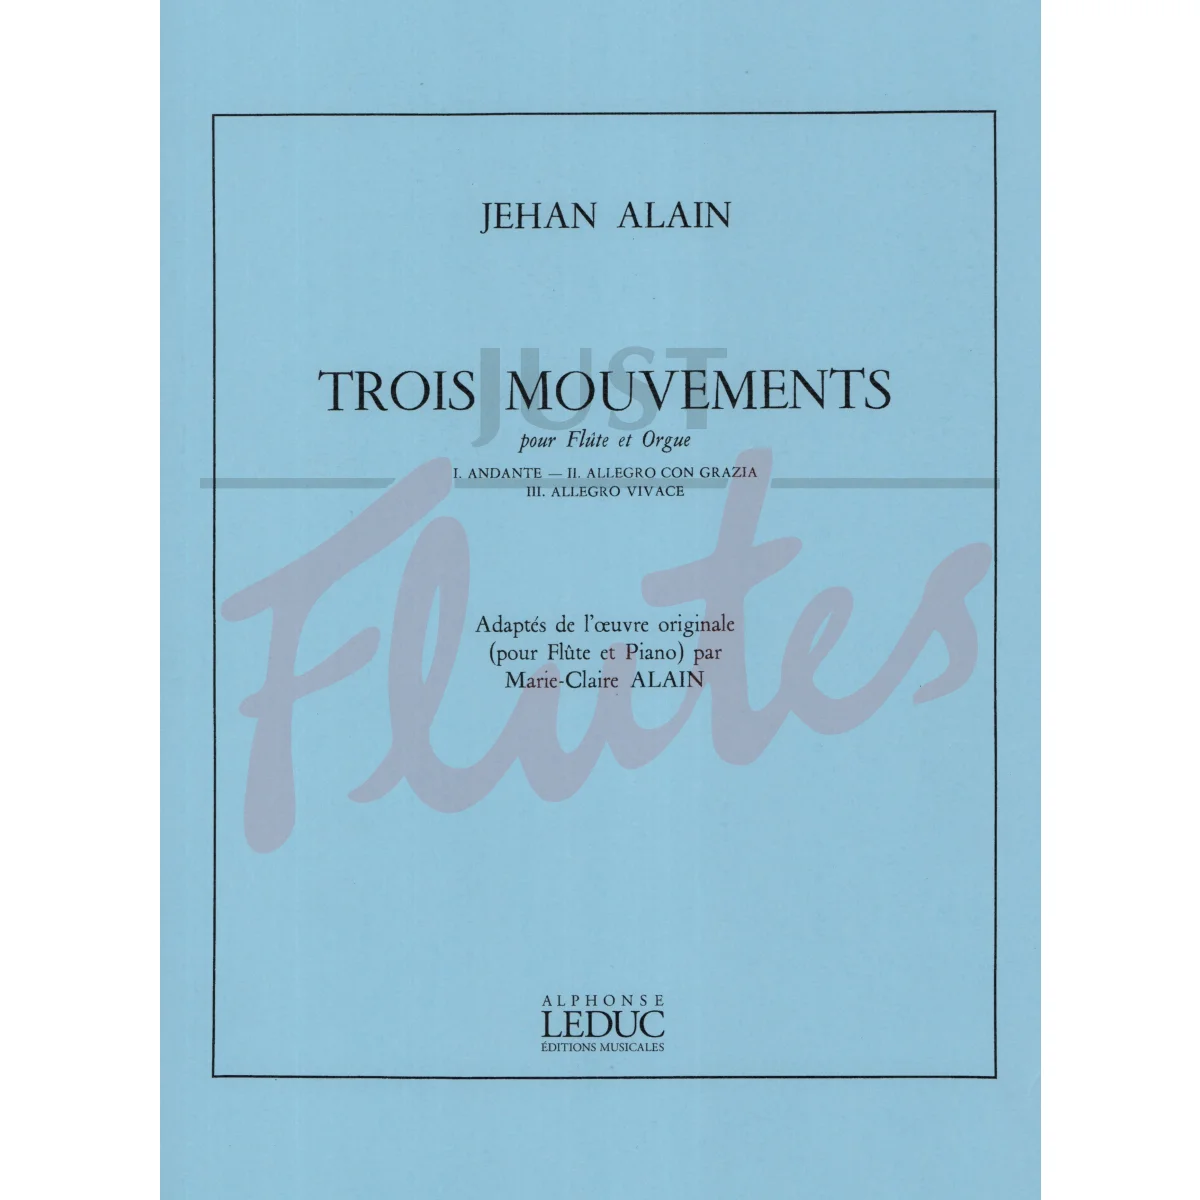 Trois Mouvements for Flute and Organ